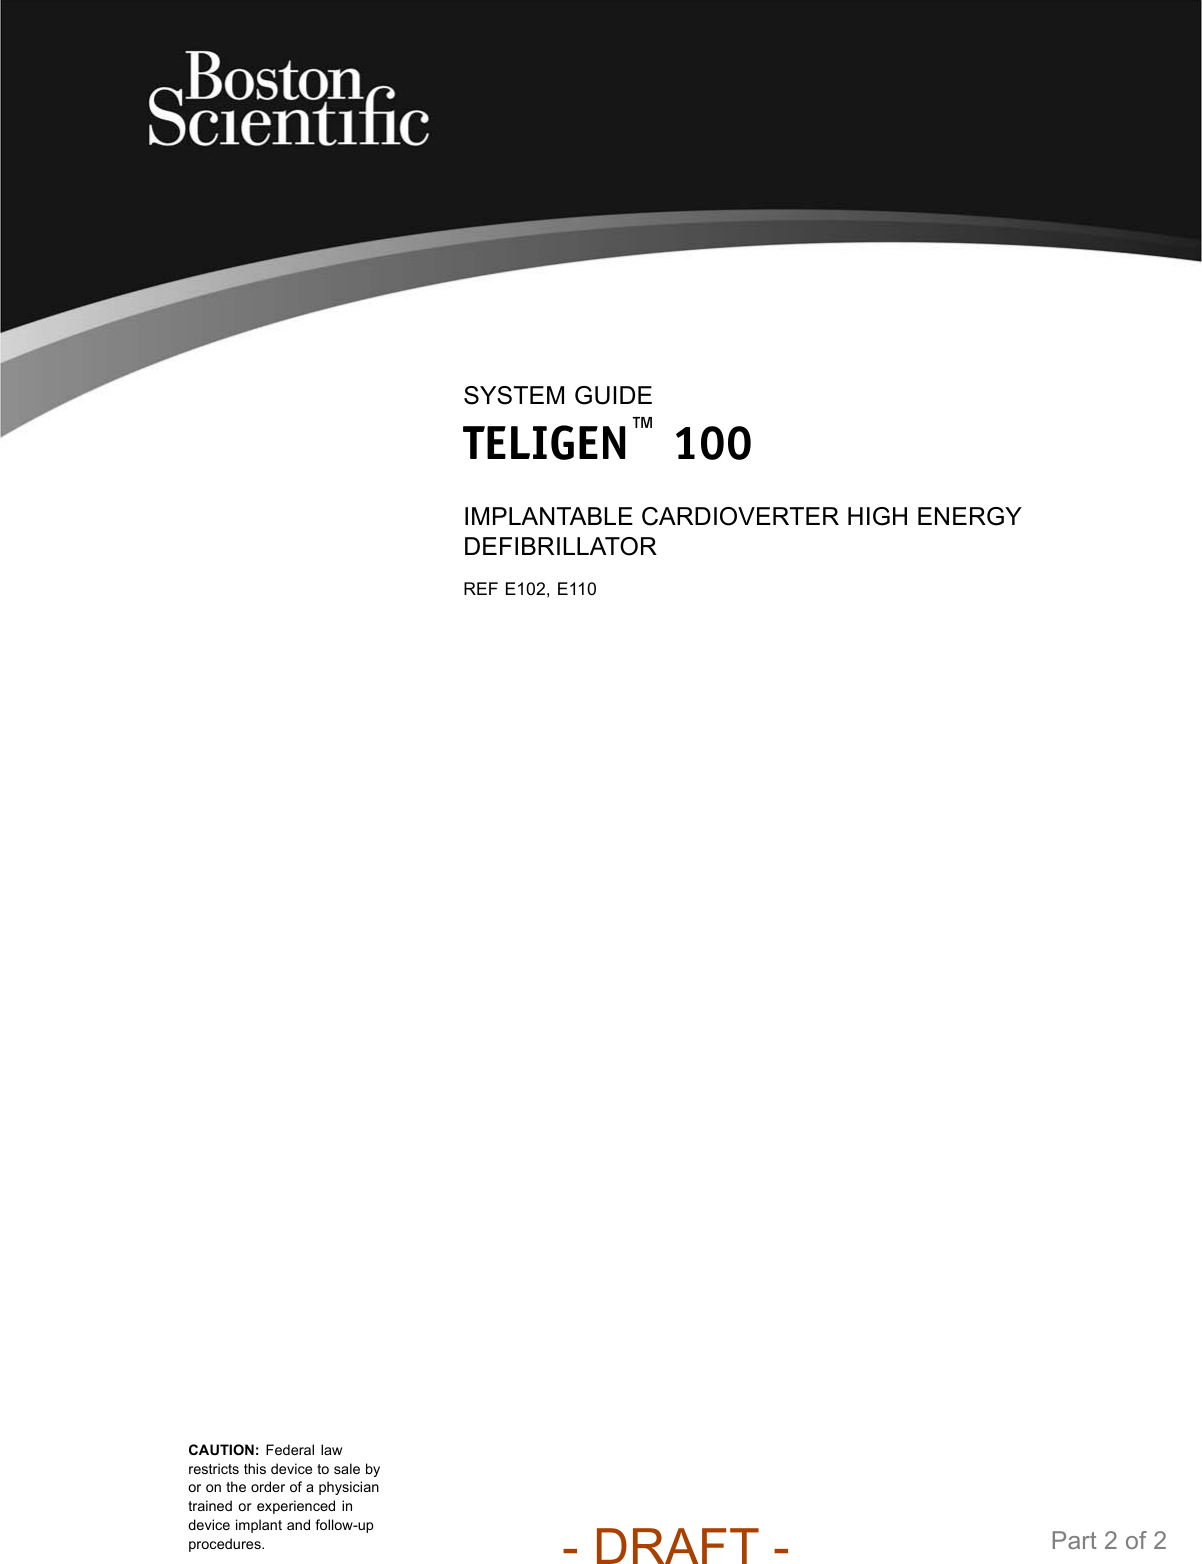 SYSTEM GUIDETELIGEN™100IMPLANTABLE CARDIOVERTER HIGH ENERGYDEFIBRILLATORREF E102, E110CAUTION: Federal lawrestricts this device to sale byor on the order of a physiciantrained or experienced indevice implant and follow-upprocedures. Part 2 of 2- DRAFT -